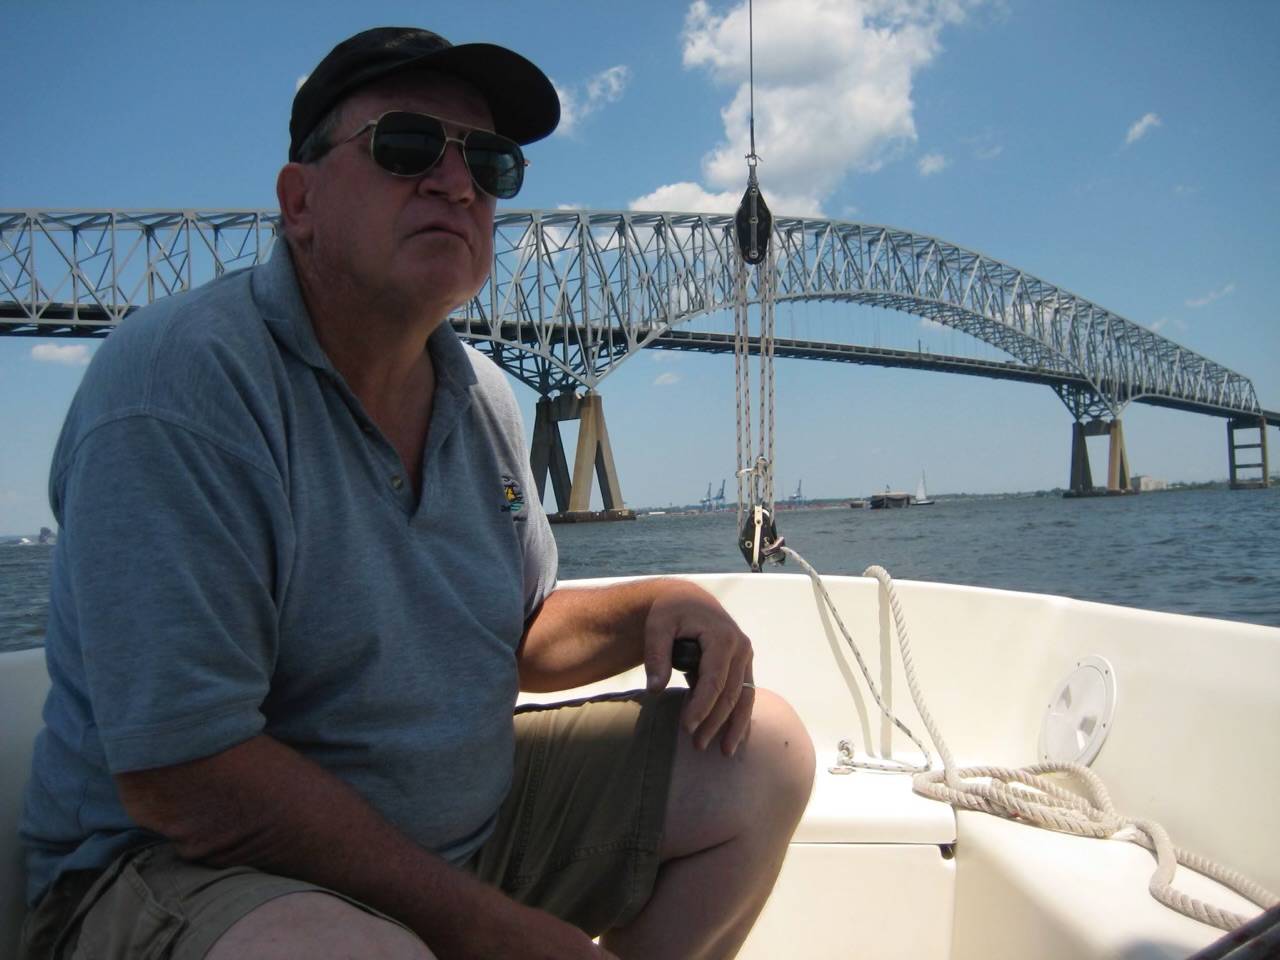 Ken Spaulding, pictured at the Key Bridge during a sail with his daughter, Stacy. The photo has become a cherished memory since her father, who taught her how to sail, died in 2016.